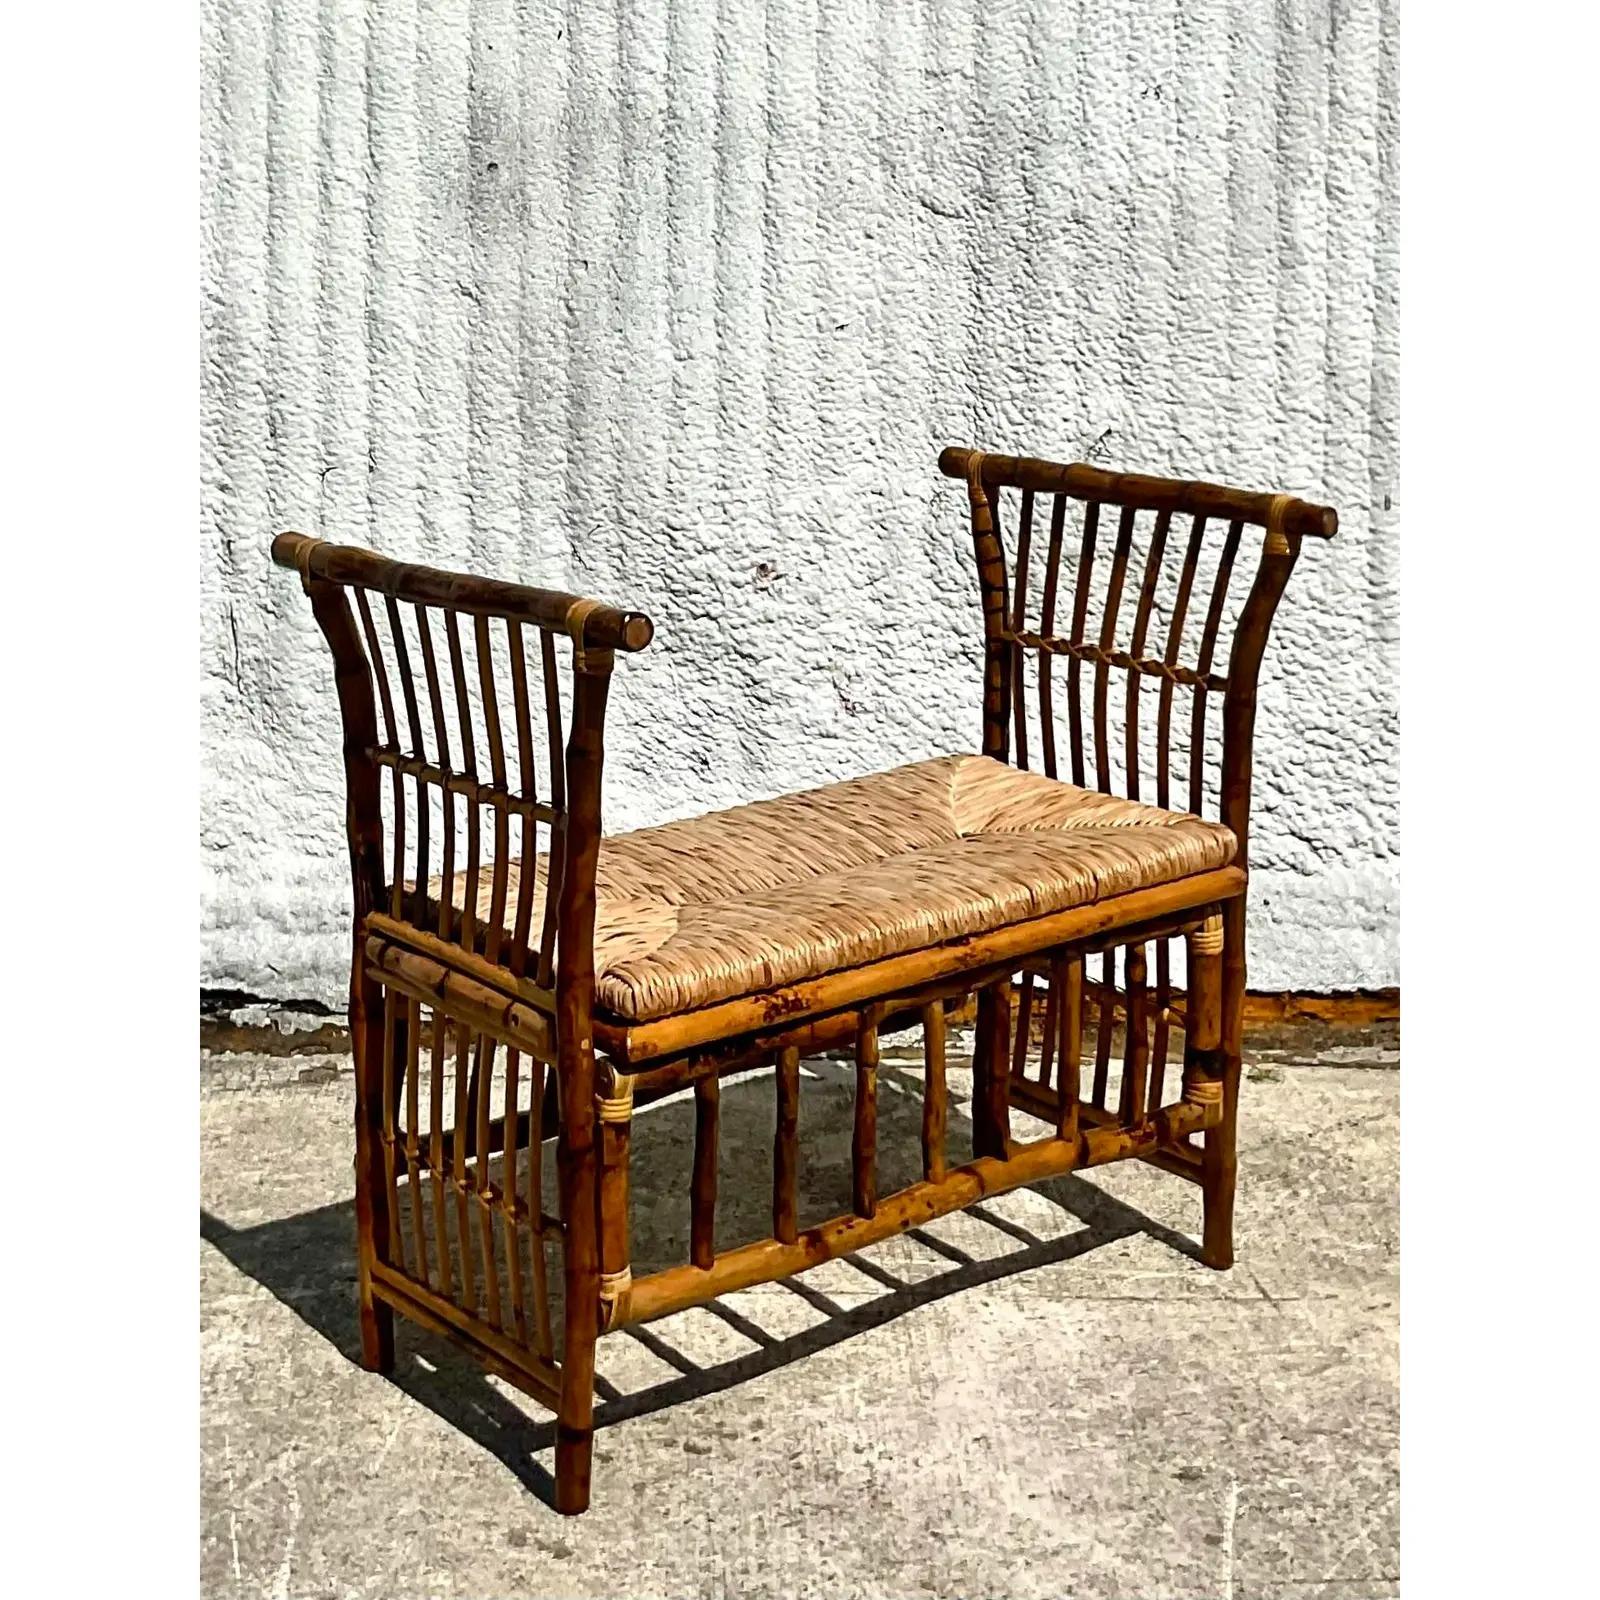 Incredible vintage Coastal bench. Beautiful heavy bamboo in a tortoise shell finish. Upholstered. Acquired from a Palm Beach estate.